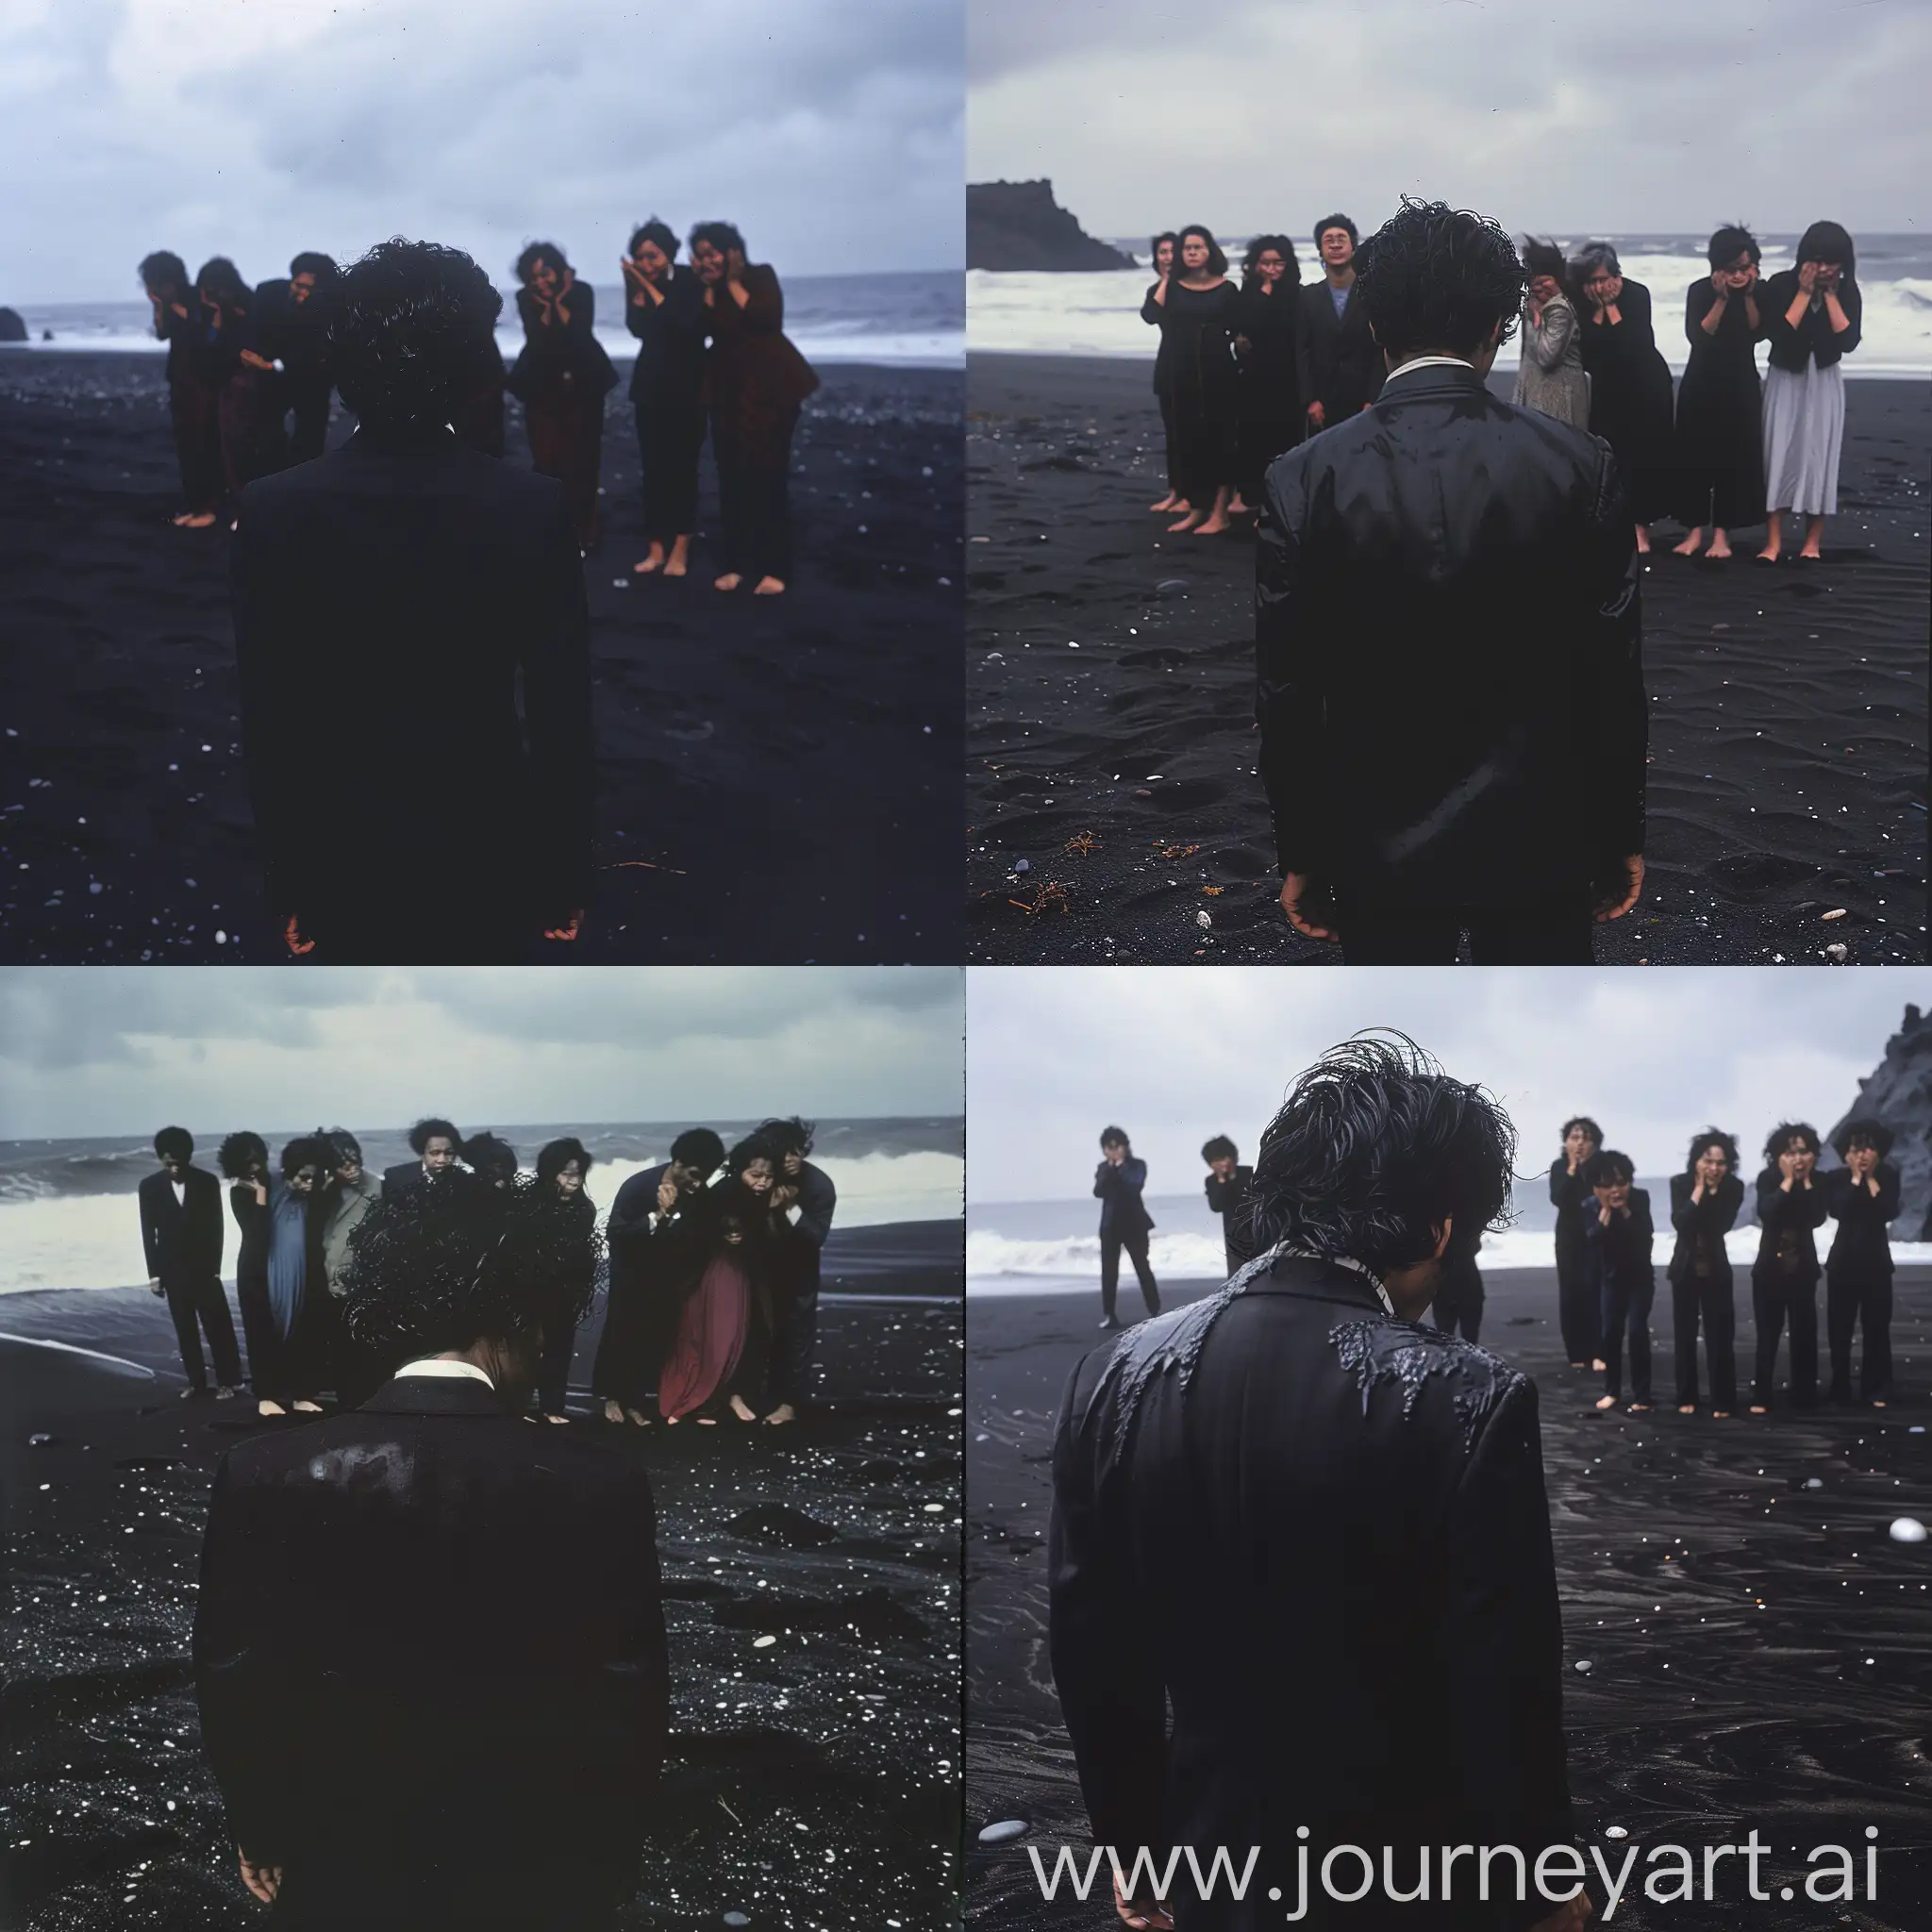 Mysterious-Man-in-Black-Suit-Stands-Amidst-Crying-Figures-on-Black-Sand-Beach